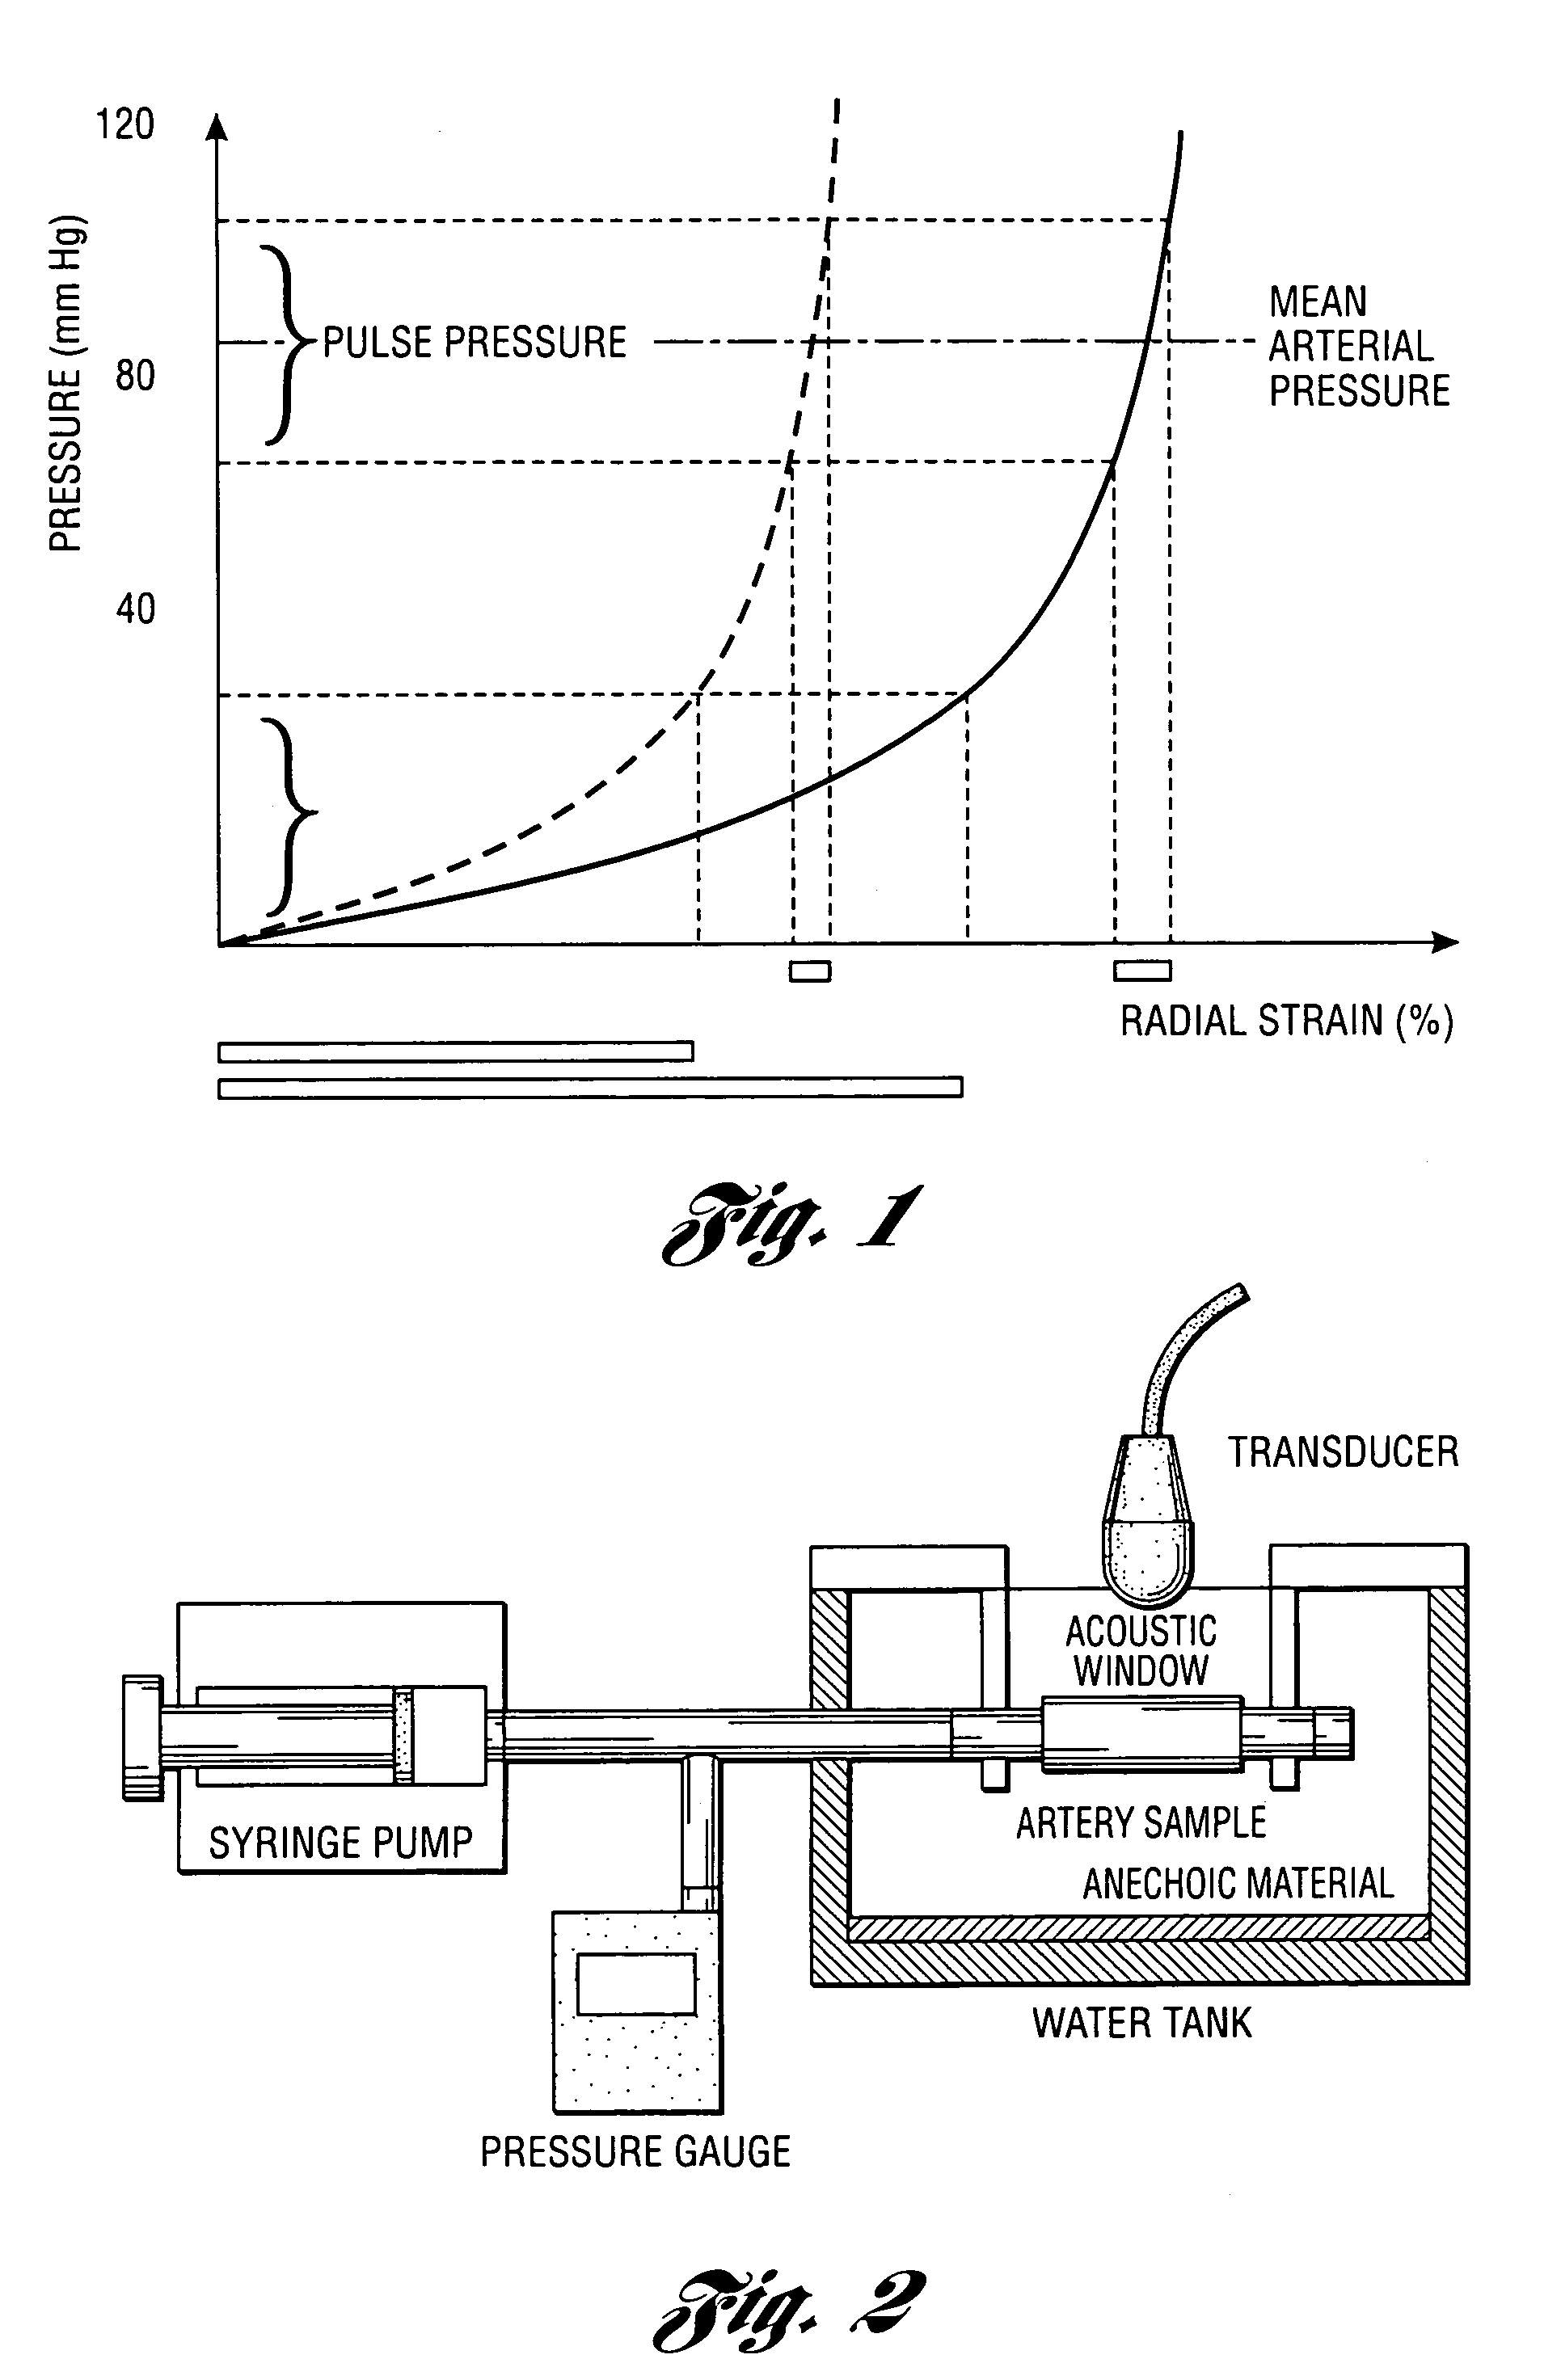 Methods and systems for measuring mechanical property of a vascular wall and method and system for determining health of a vascular structure